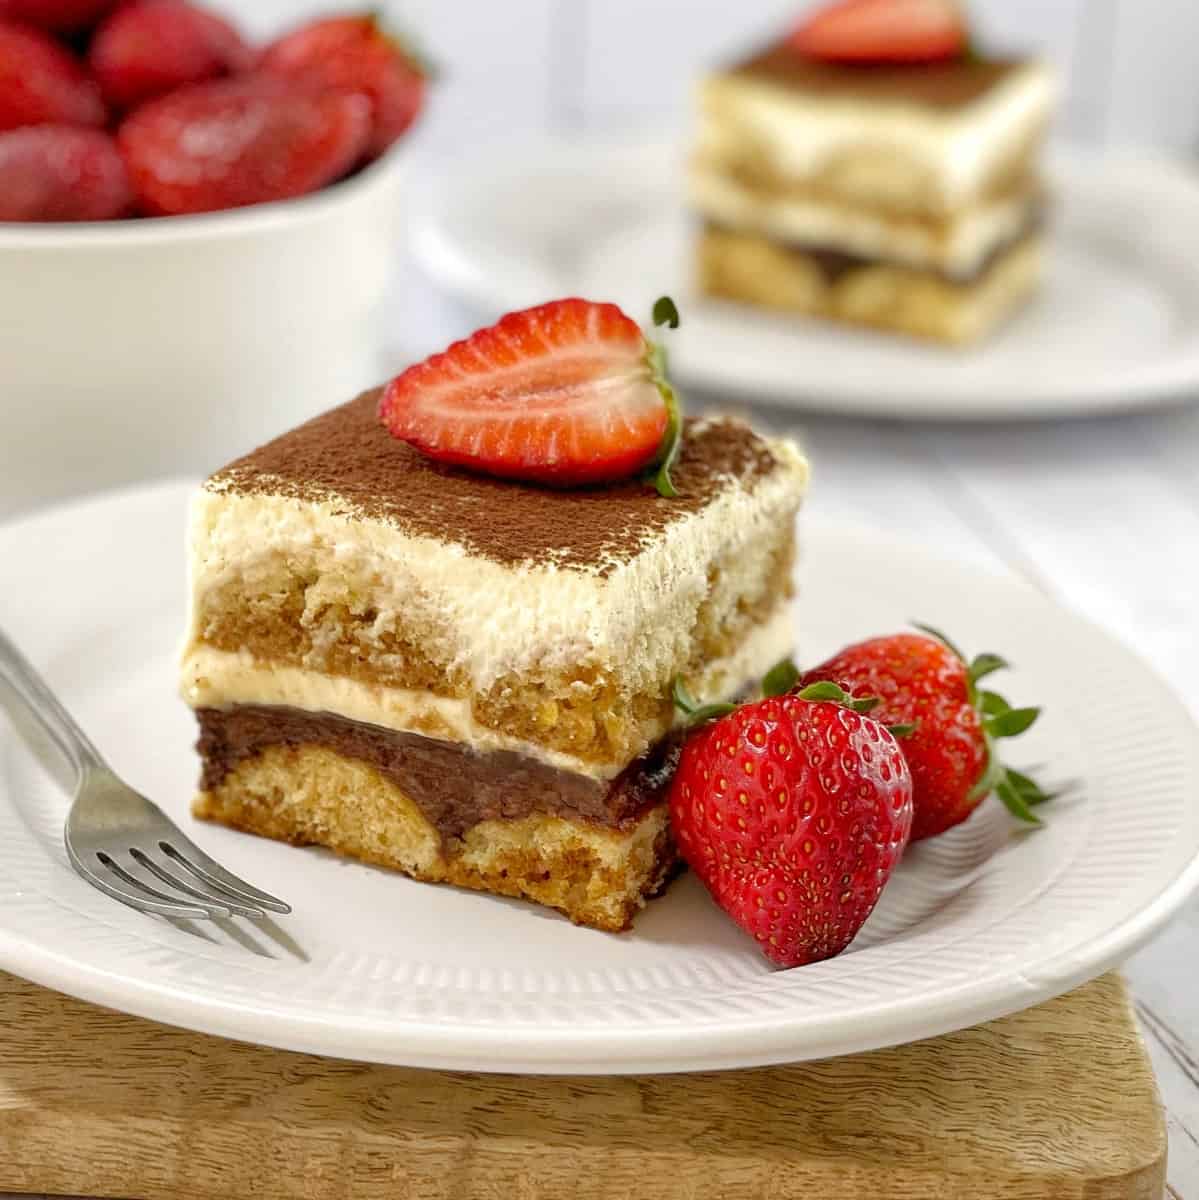 Serving of tiramisu with layer of Nutella on a white plate with another serving and strawberries in the background.